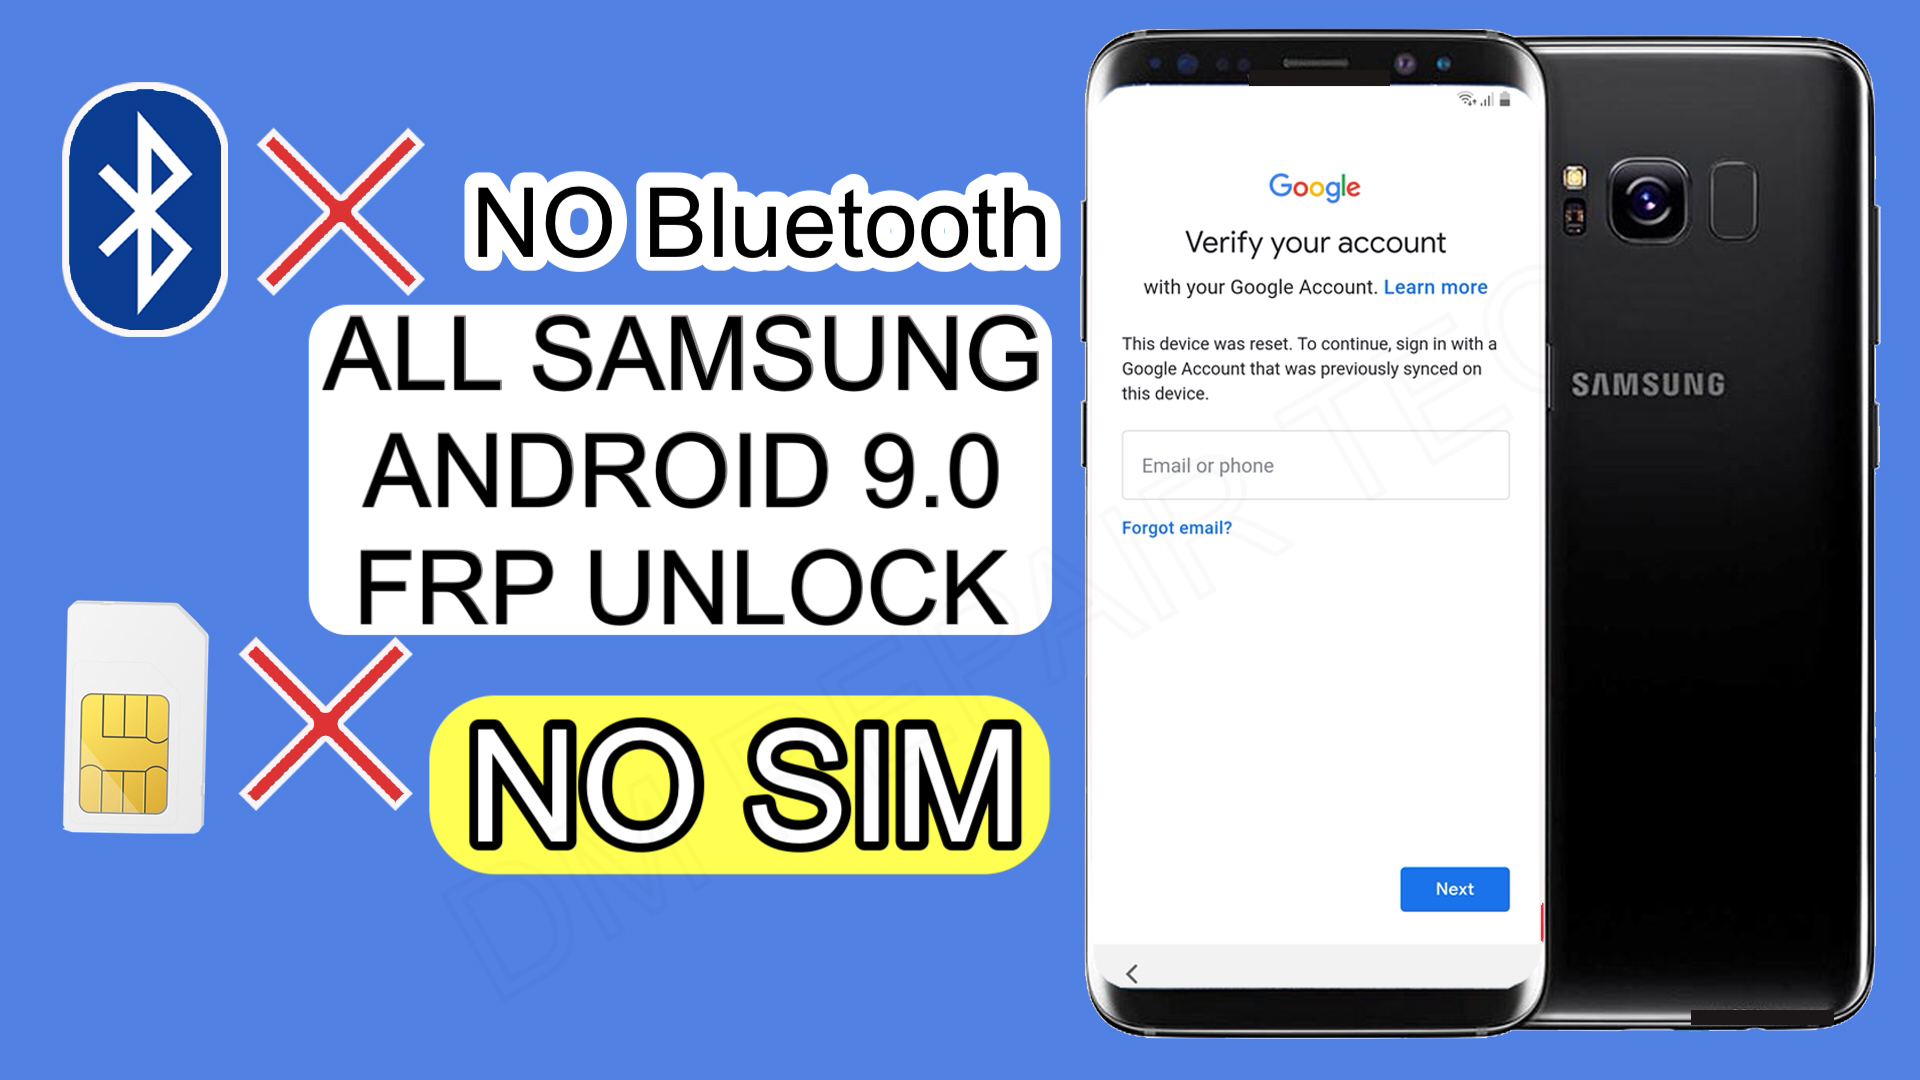 Samsung Android 12 FRP Bypass 2022 Without SIM (Alliance Shield)